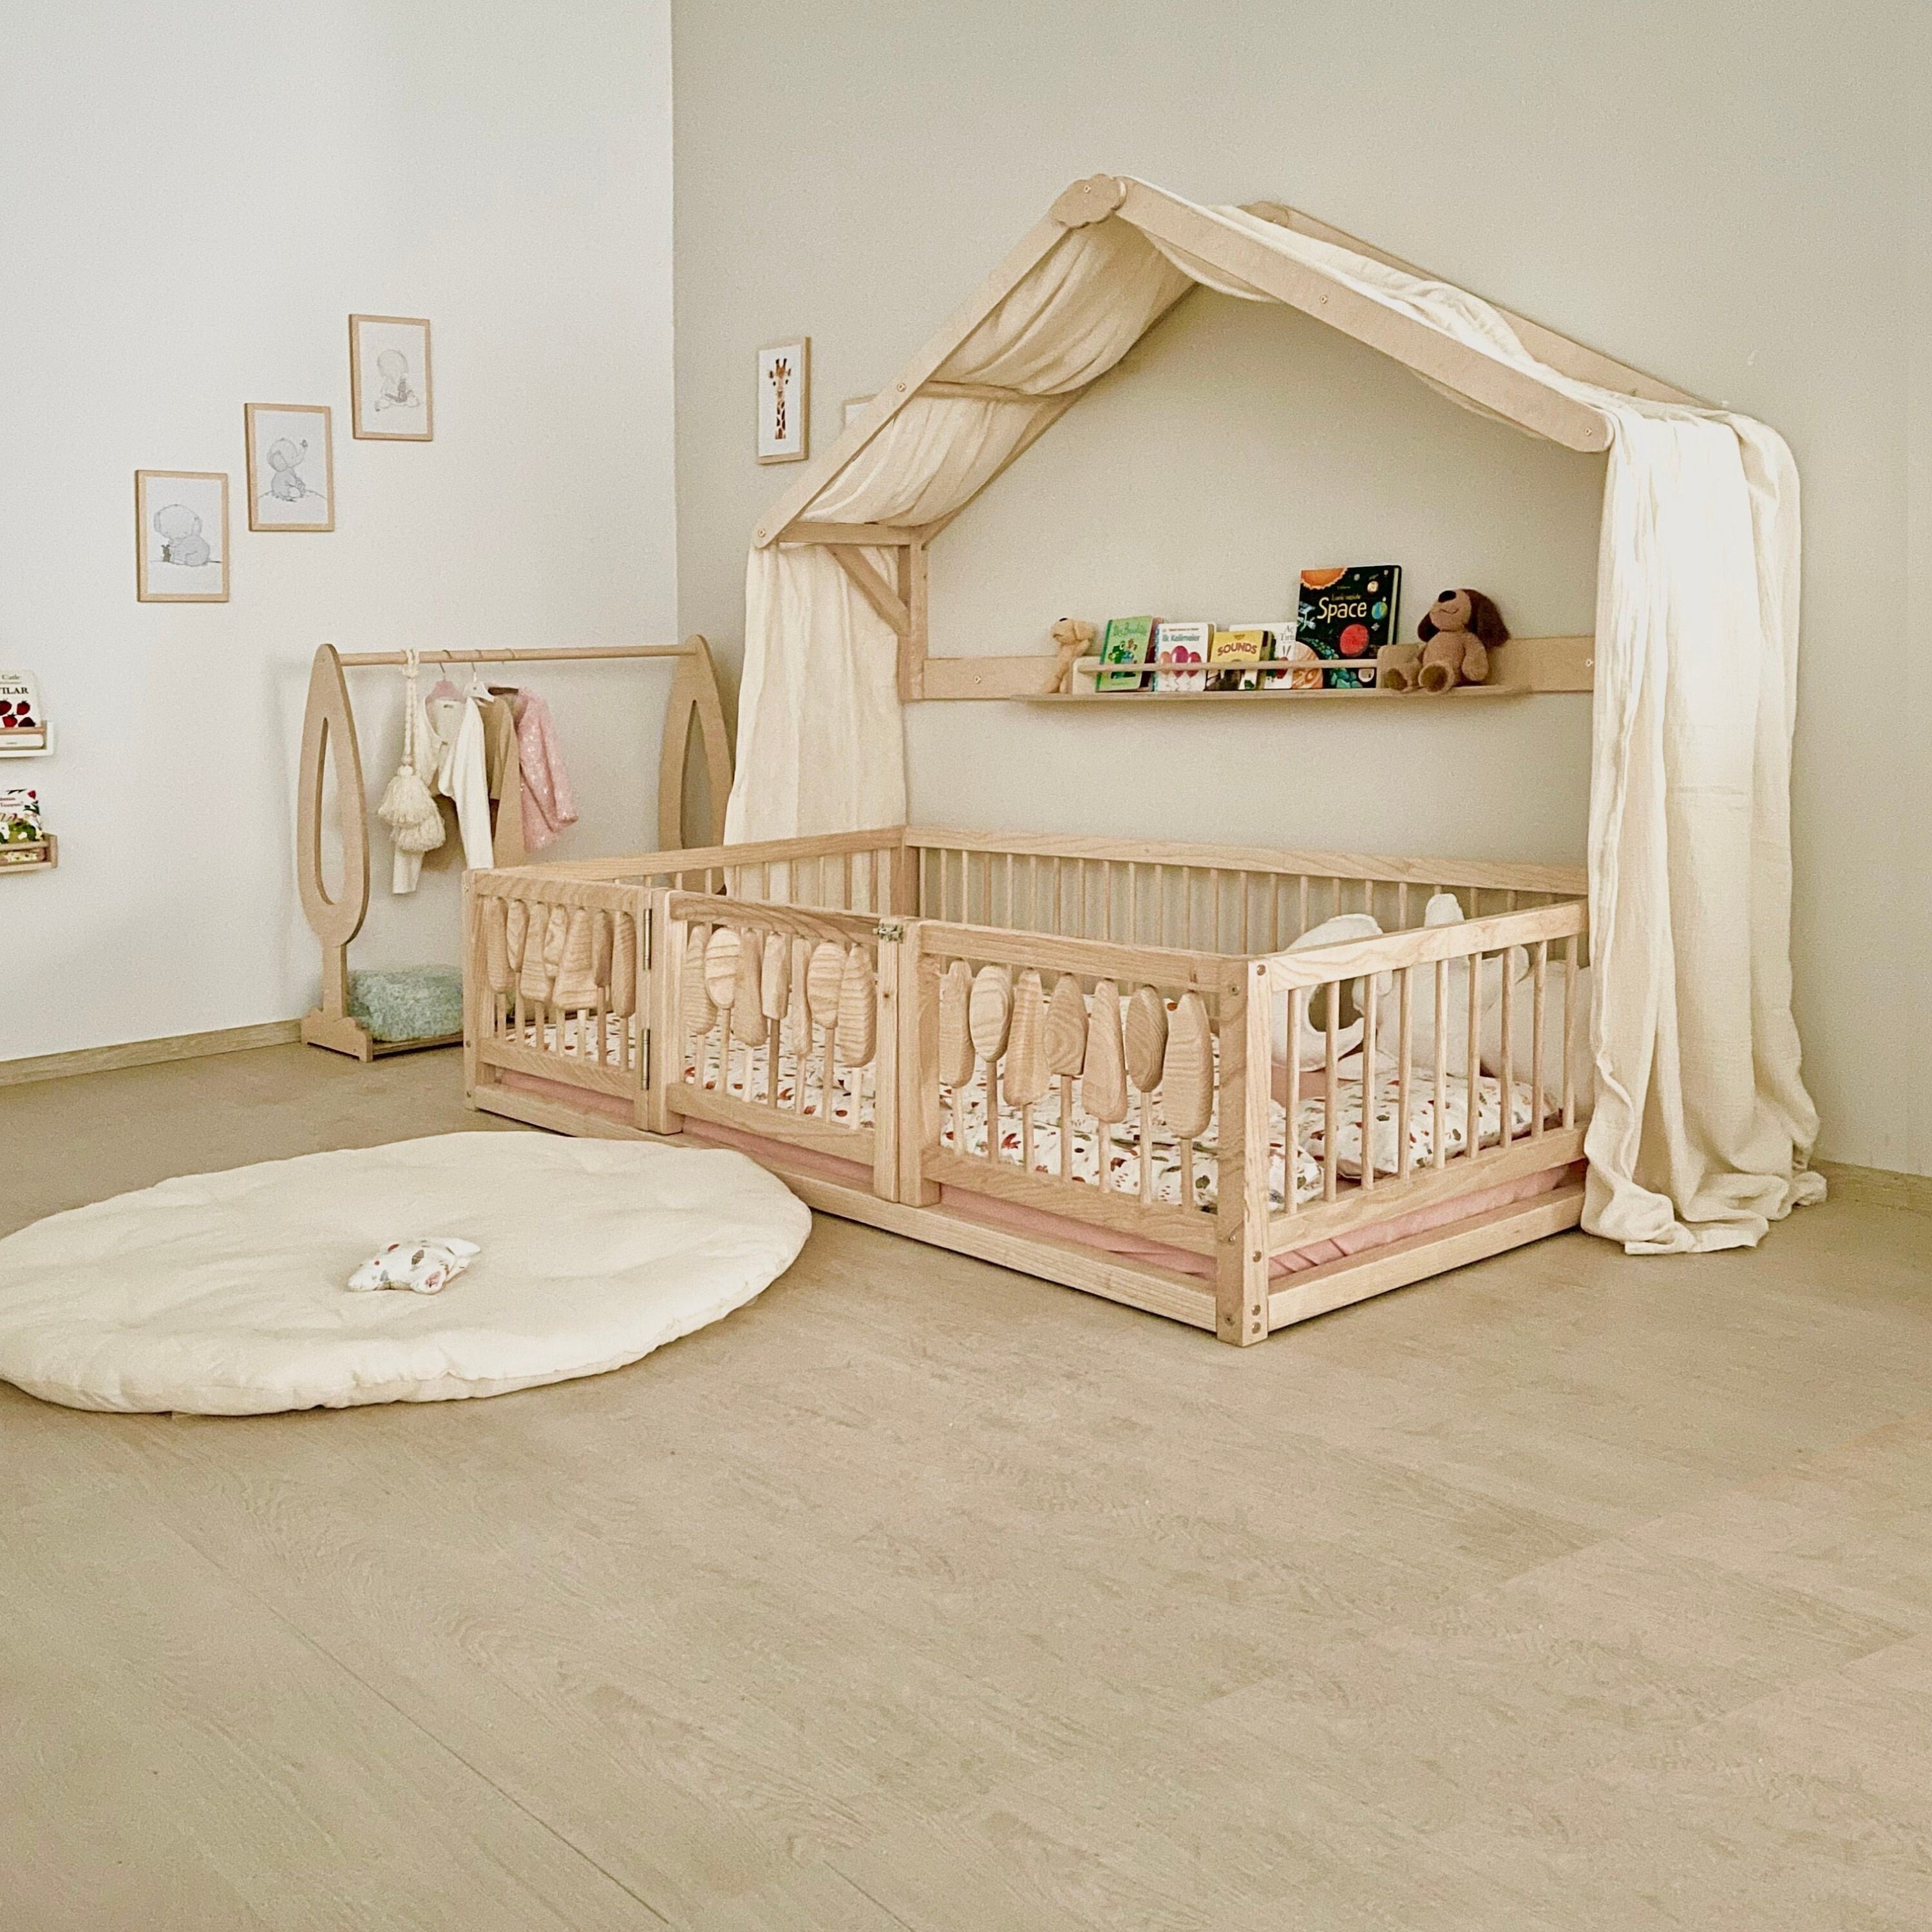 Roof Shaped Shelf With Canopy, Toddler Bed Canopy the Floor Bed is Not  Included 